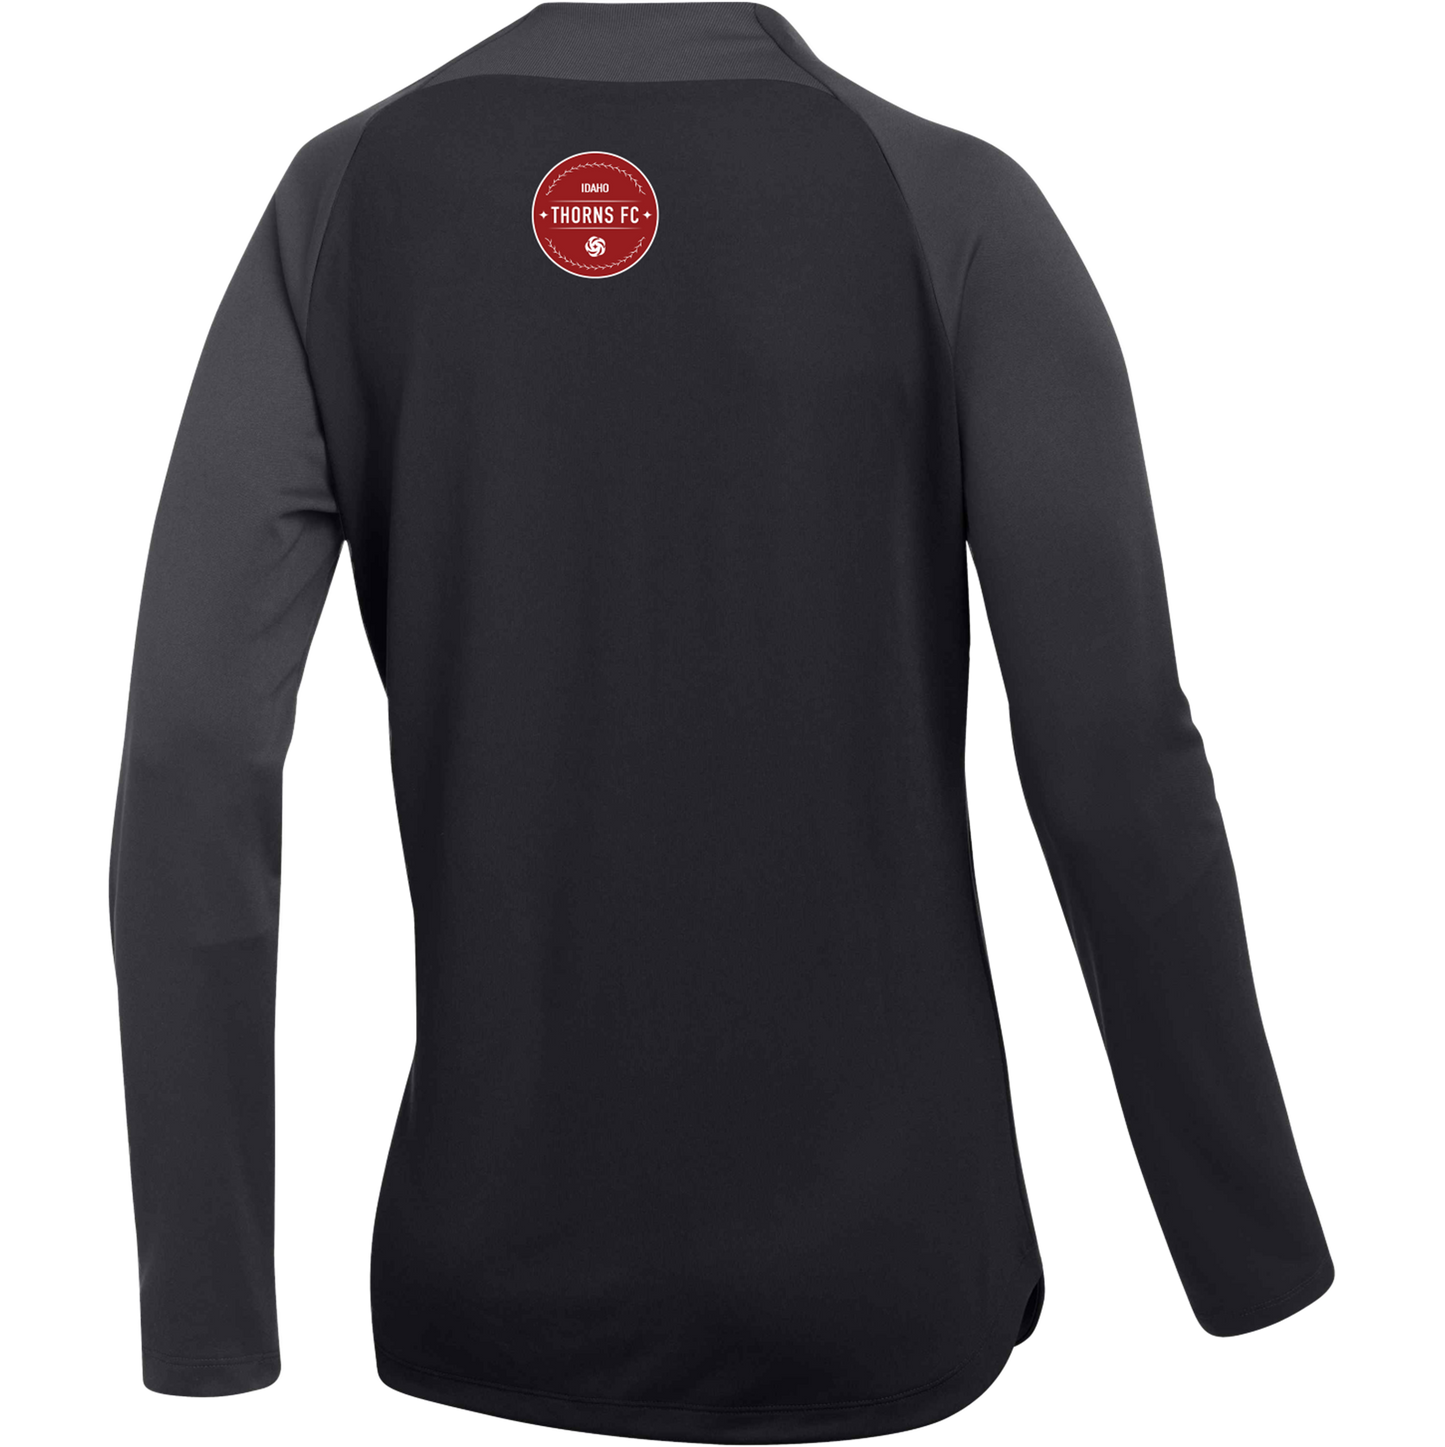 North FC Thorns Drill-Top [Women's]